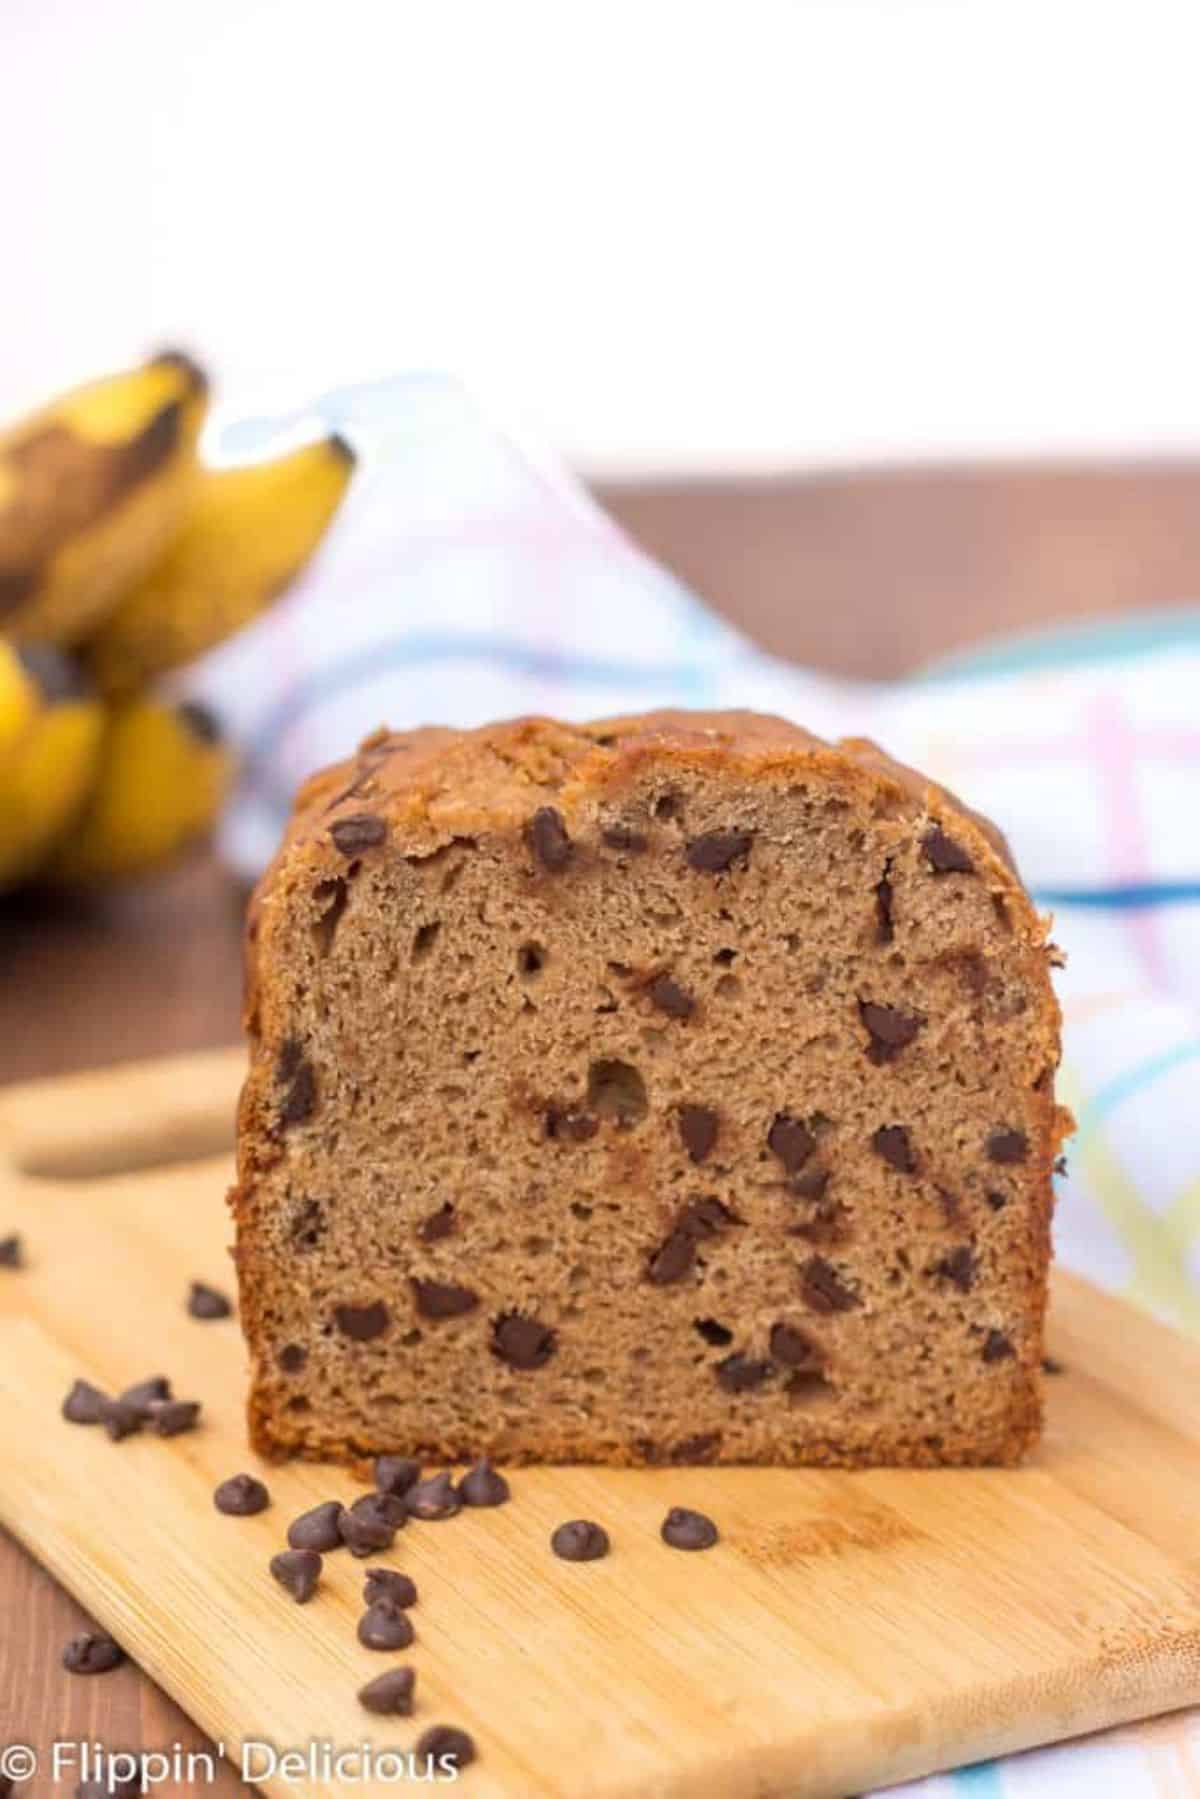 Delicious Gluten-Free Chocolate Chip Banana Bread on a wooden cutting board.